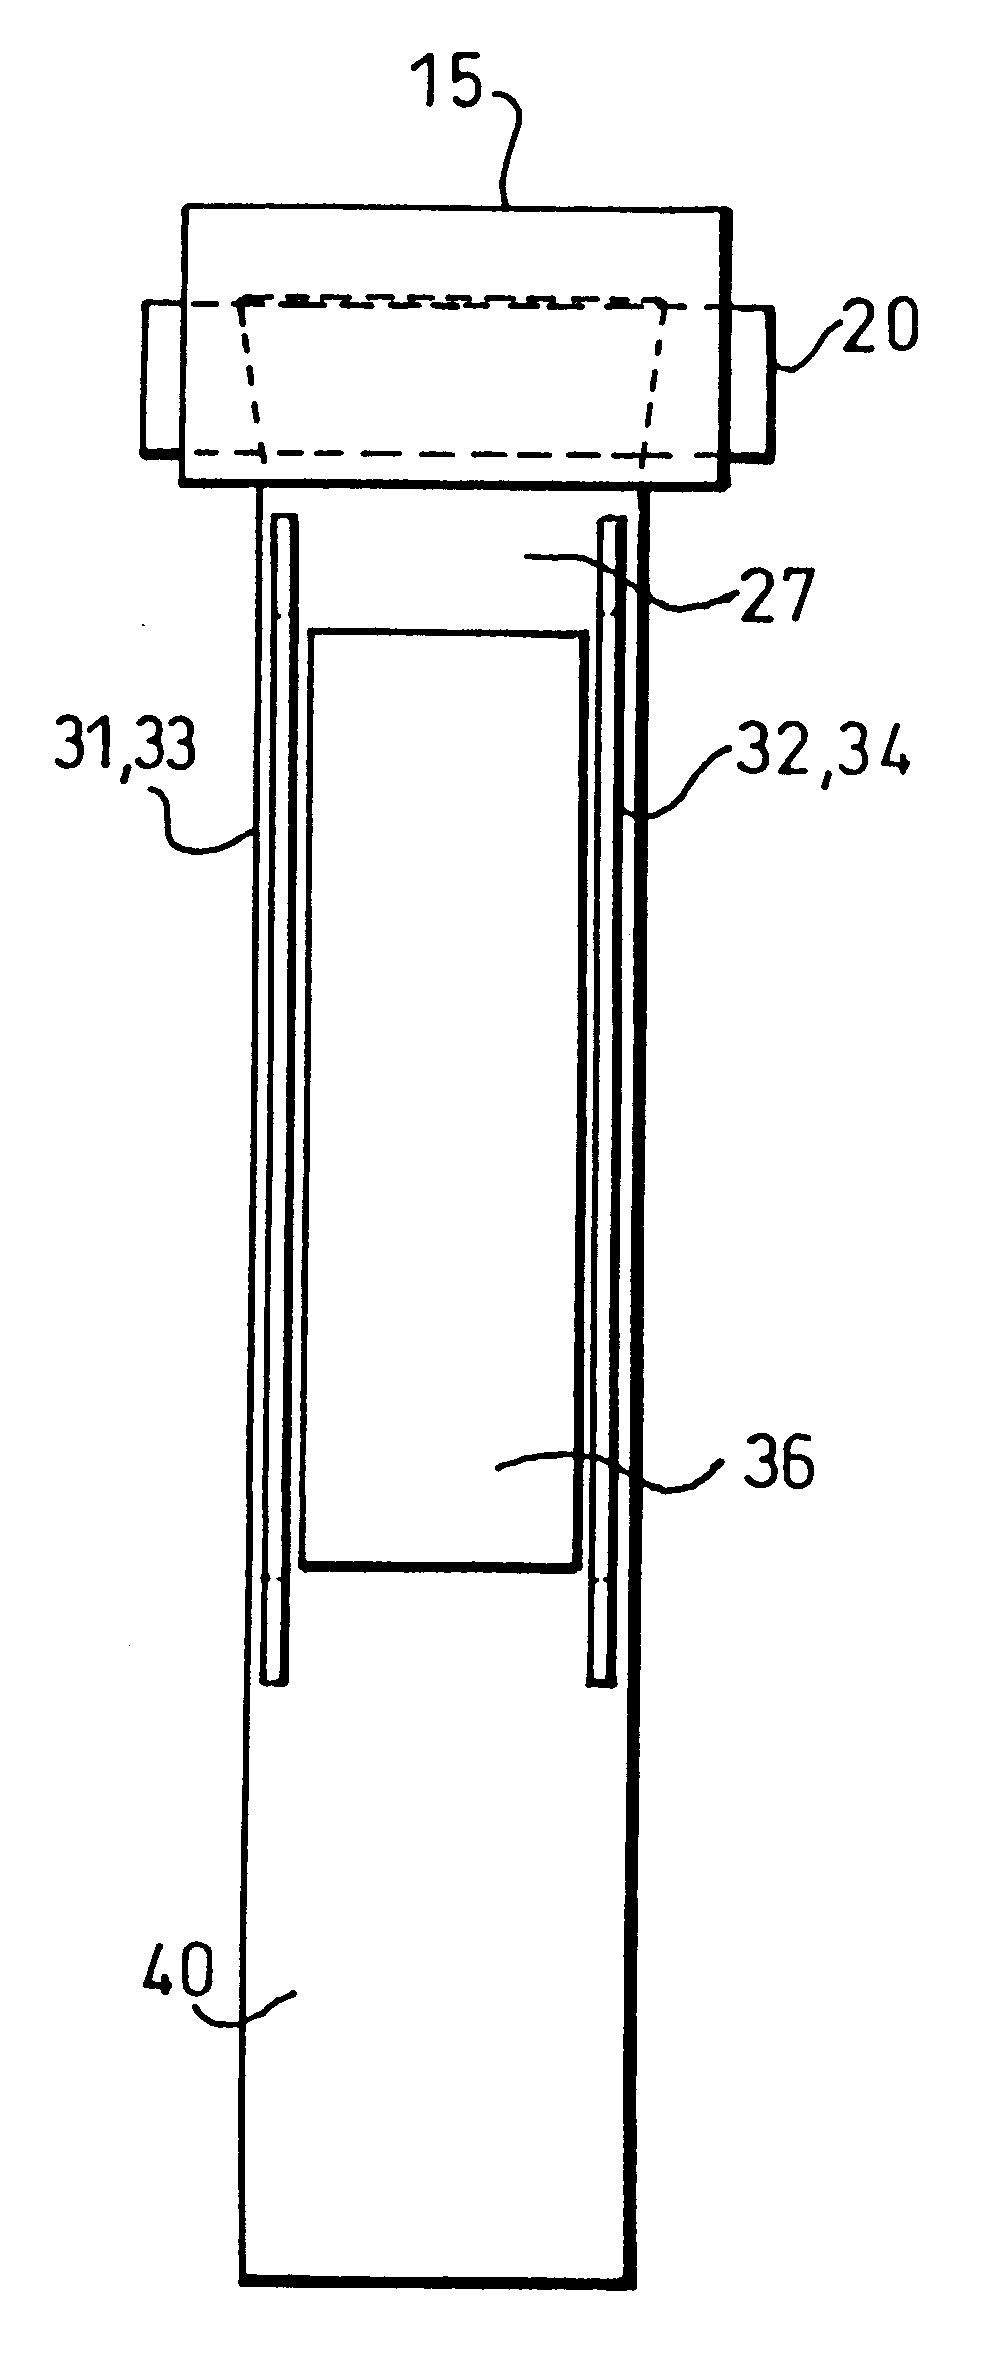 Process and apparatus for forming plastic sheet